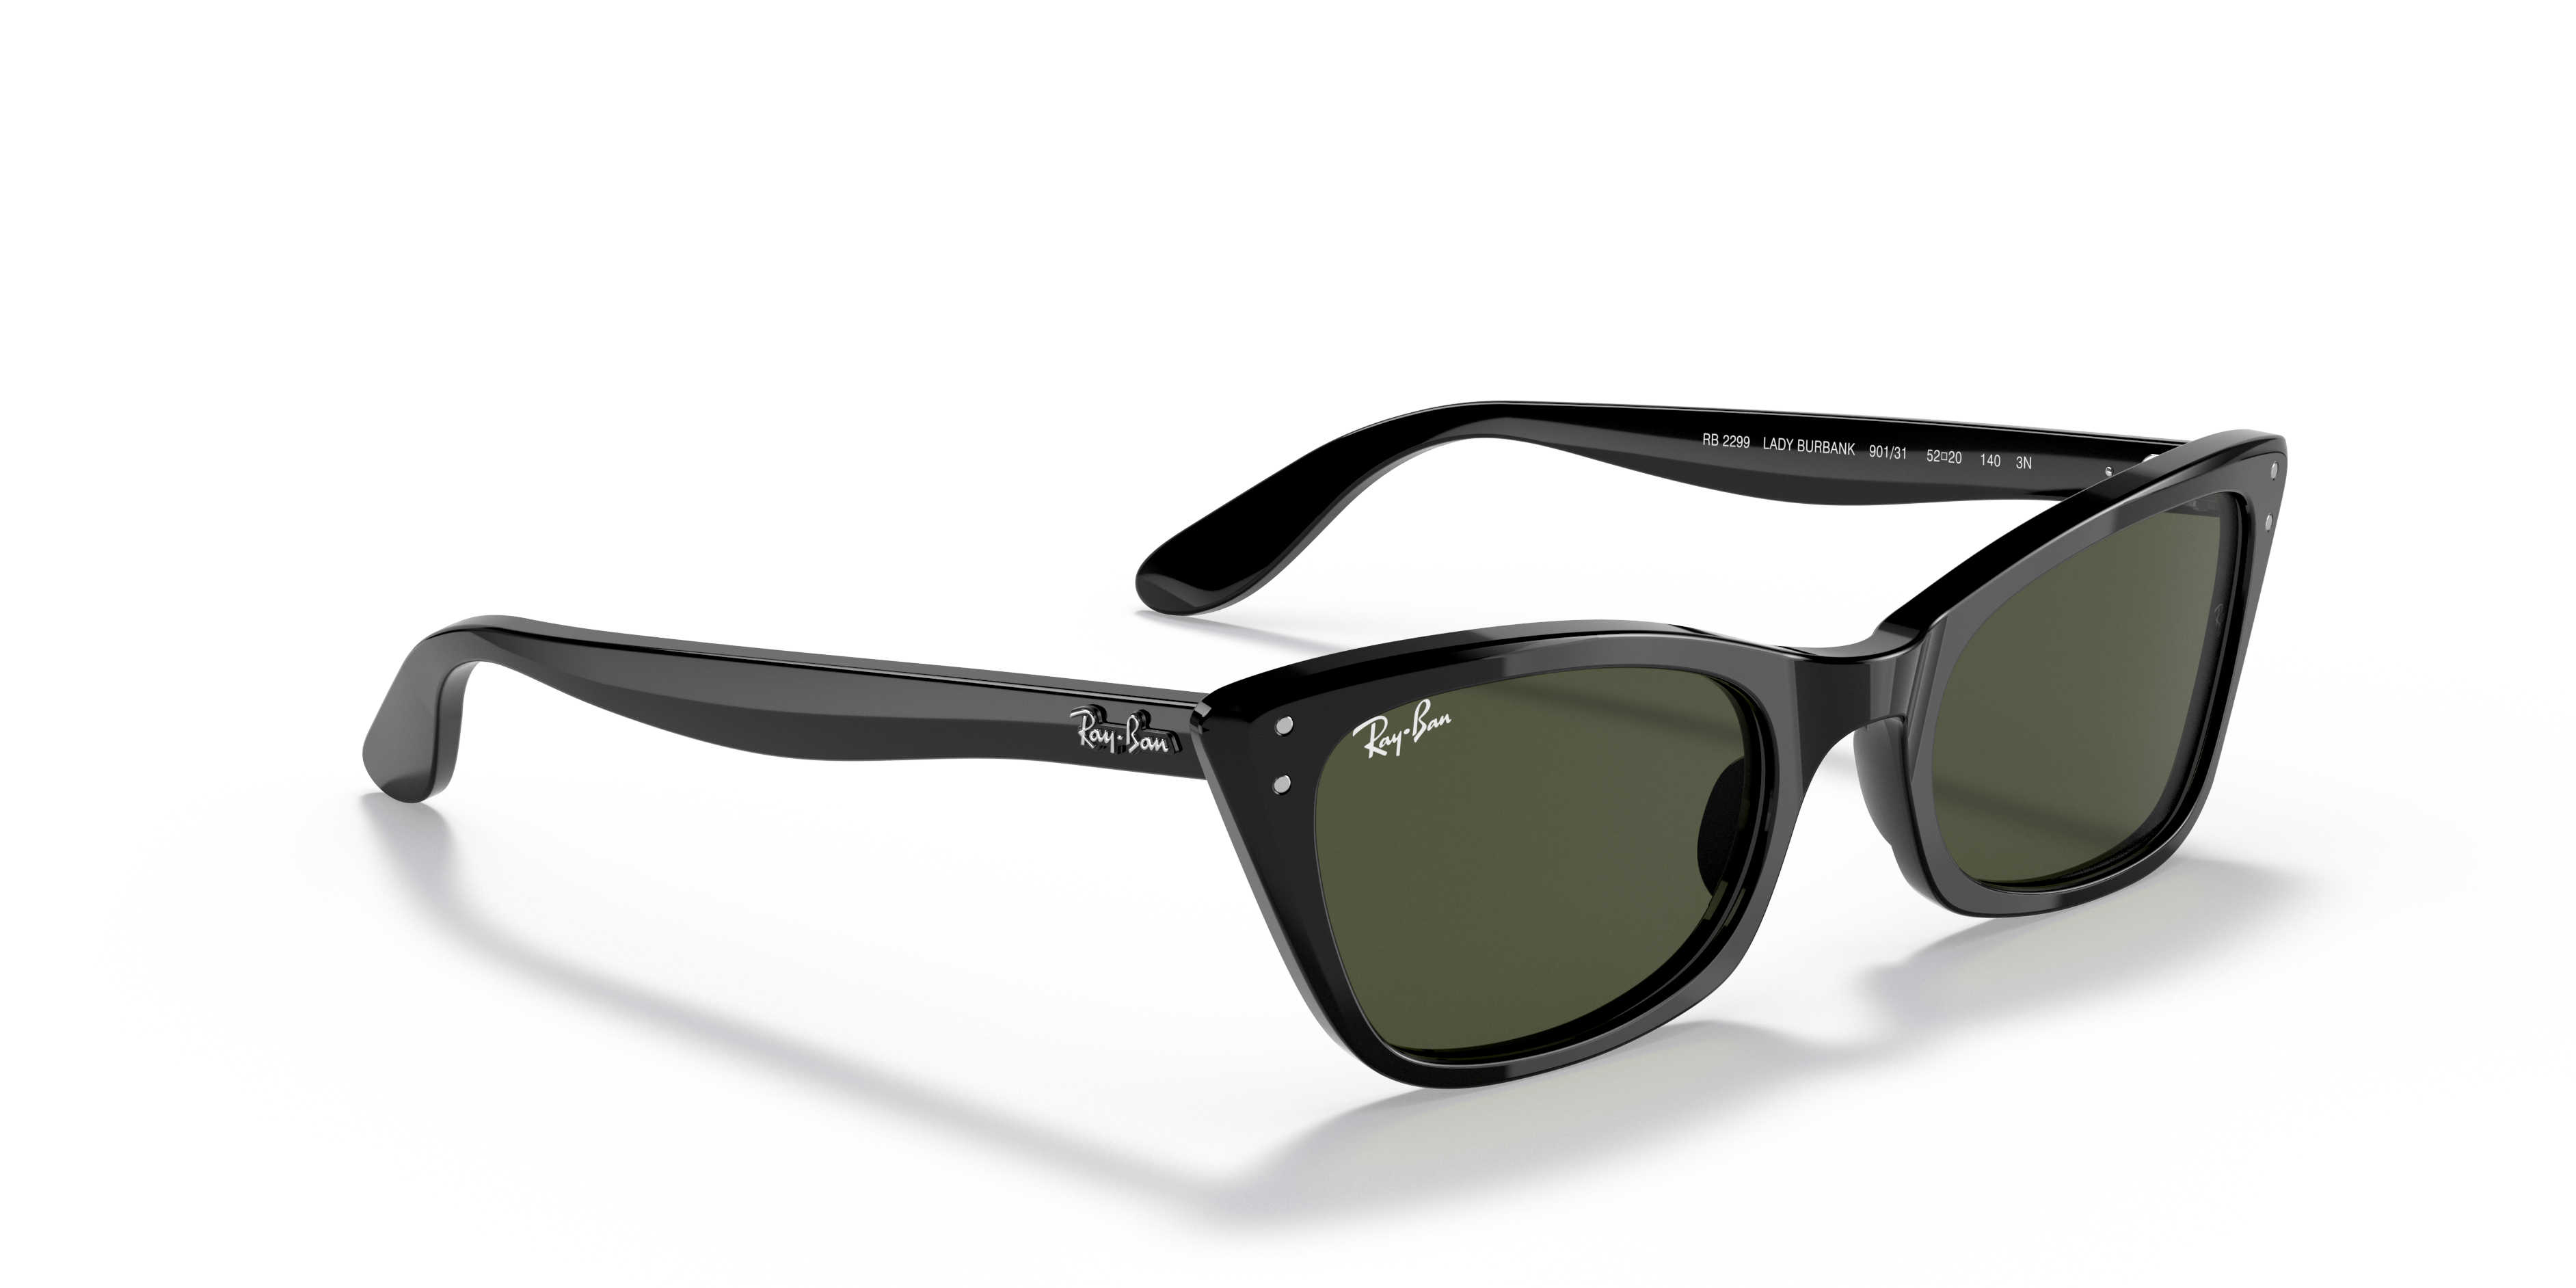 Lady Burbank Sunglasses in Black and Green | Ray-Ban®